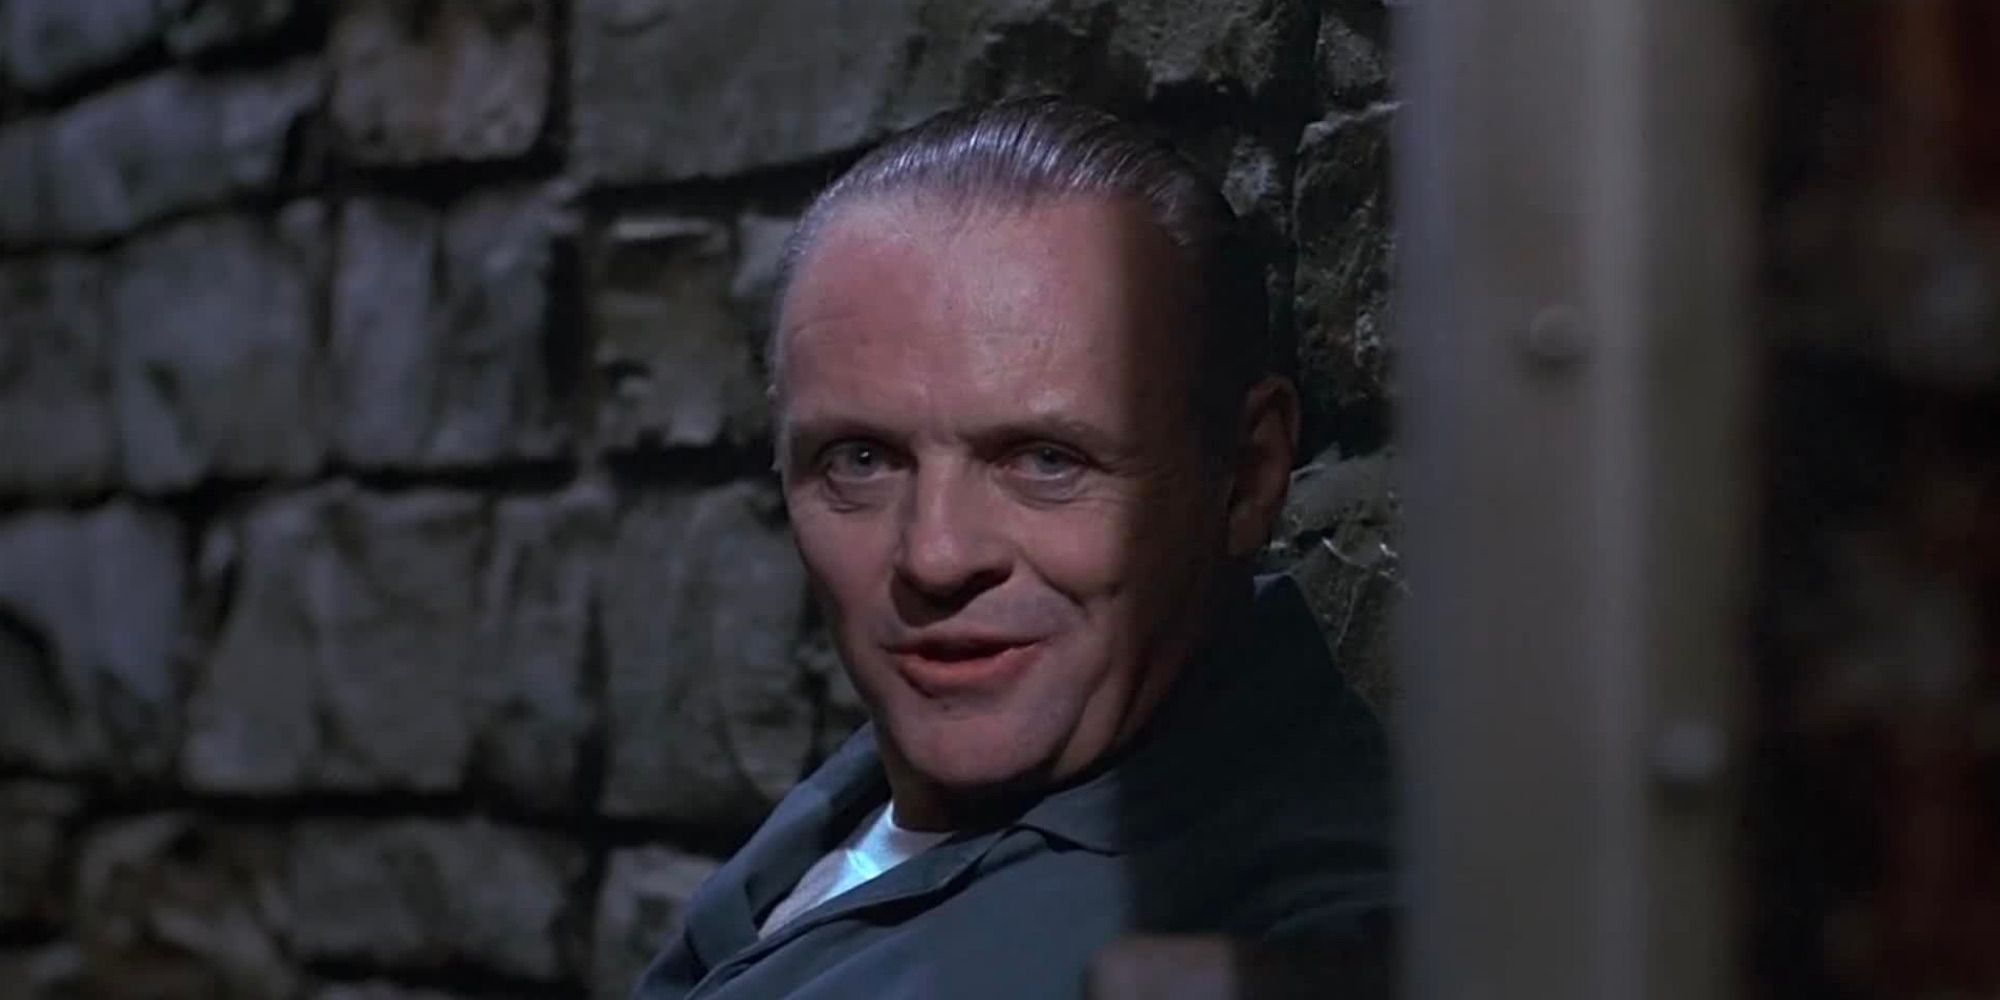 Hannibal Lecter smiles at Clarice from his prison cell in Silence of the Lambs